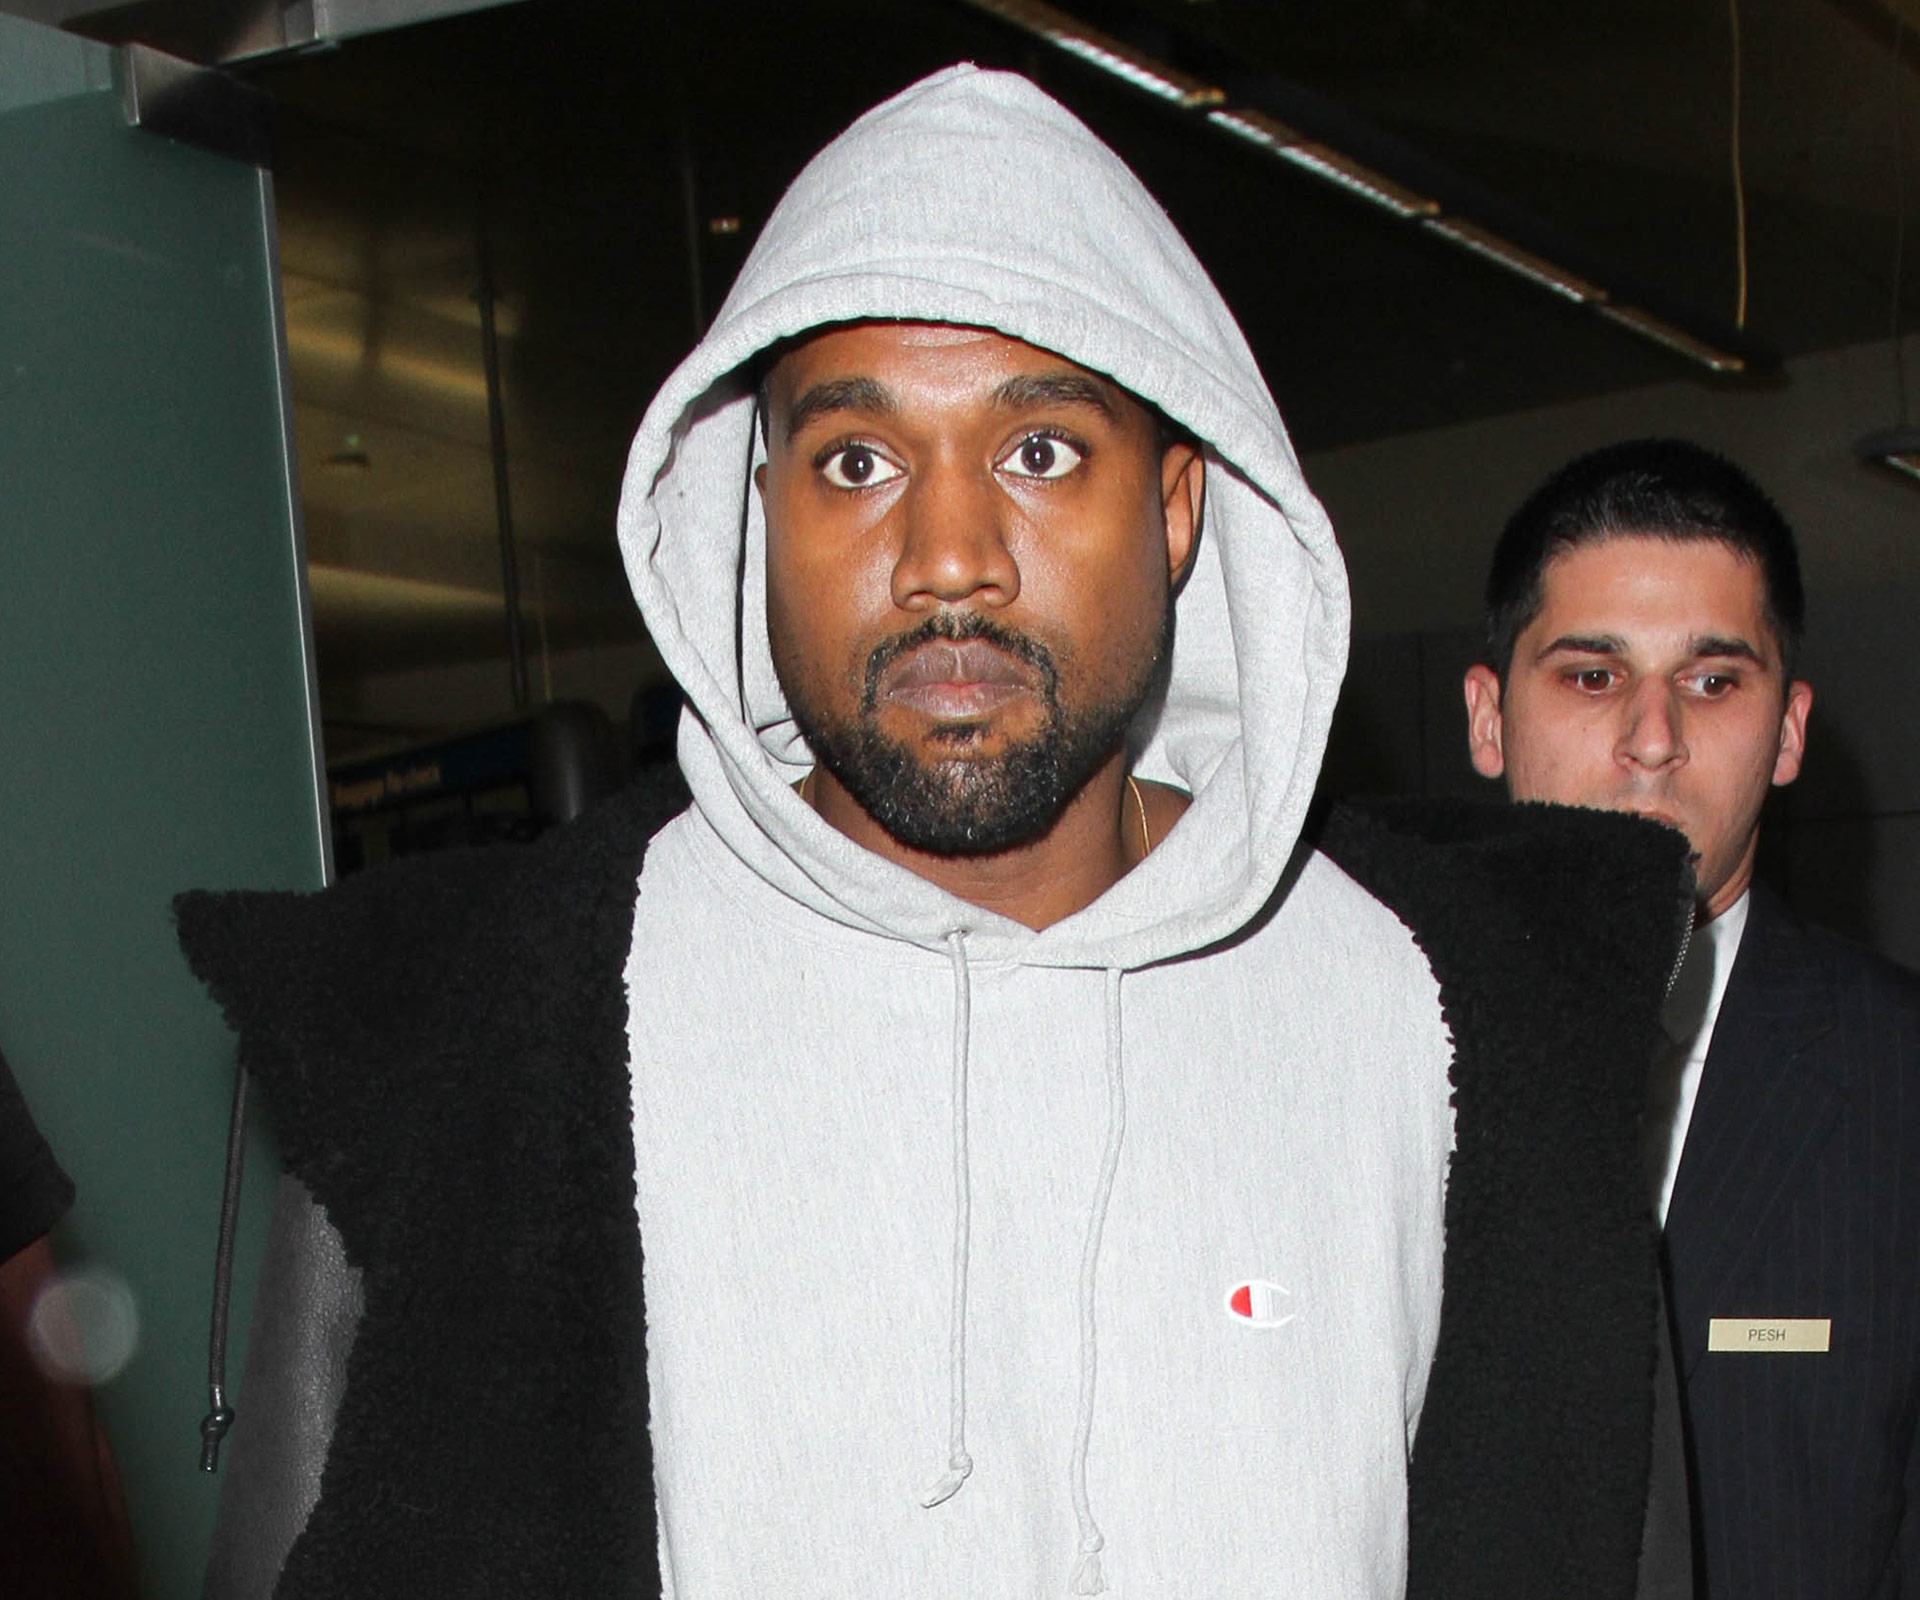 New details of Kanye West’s condition emerge